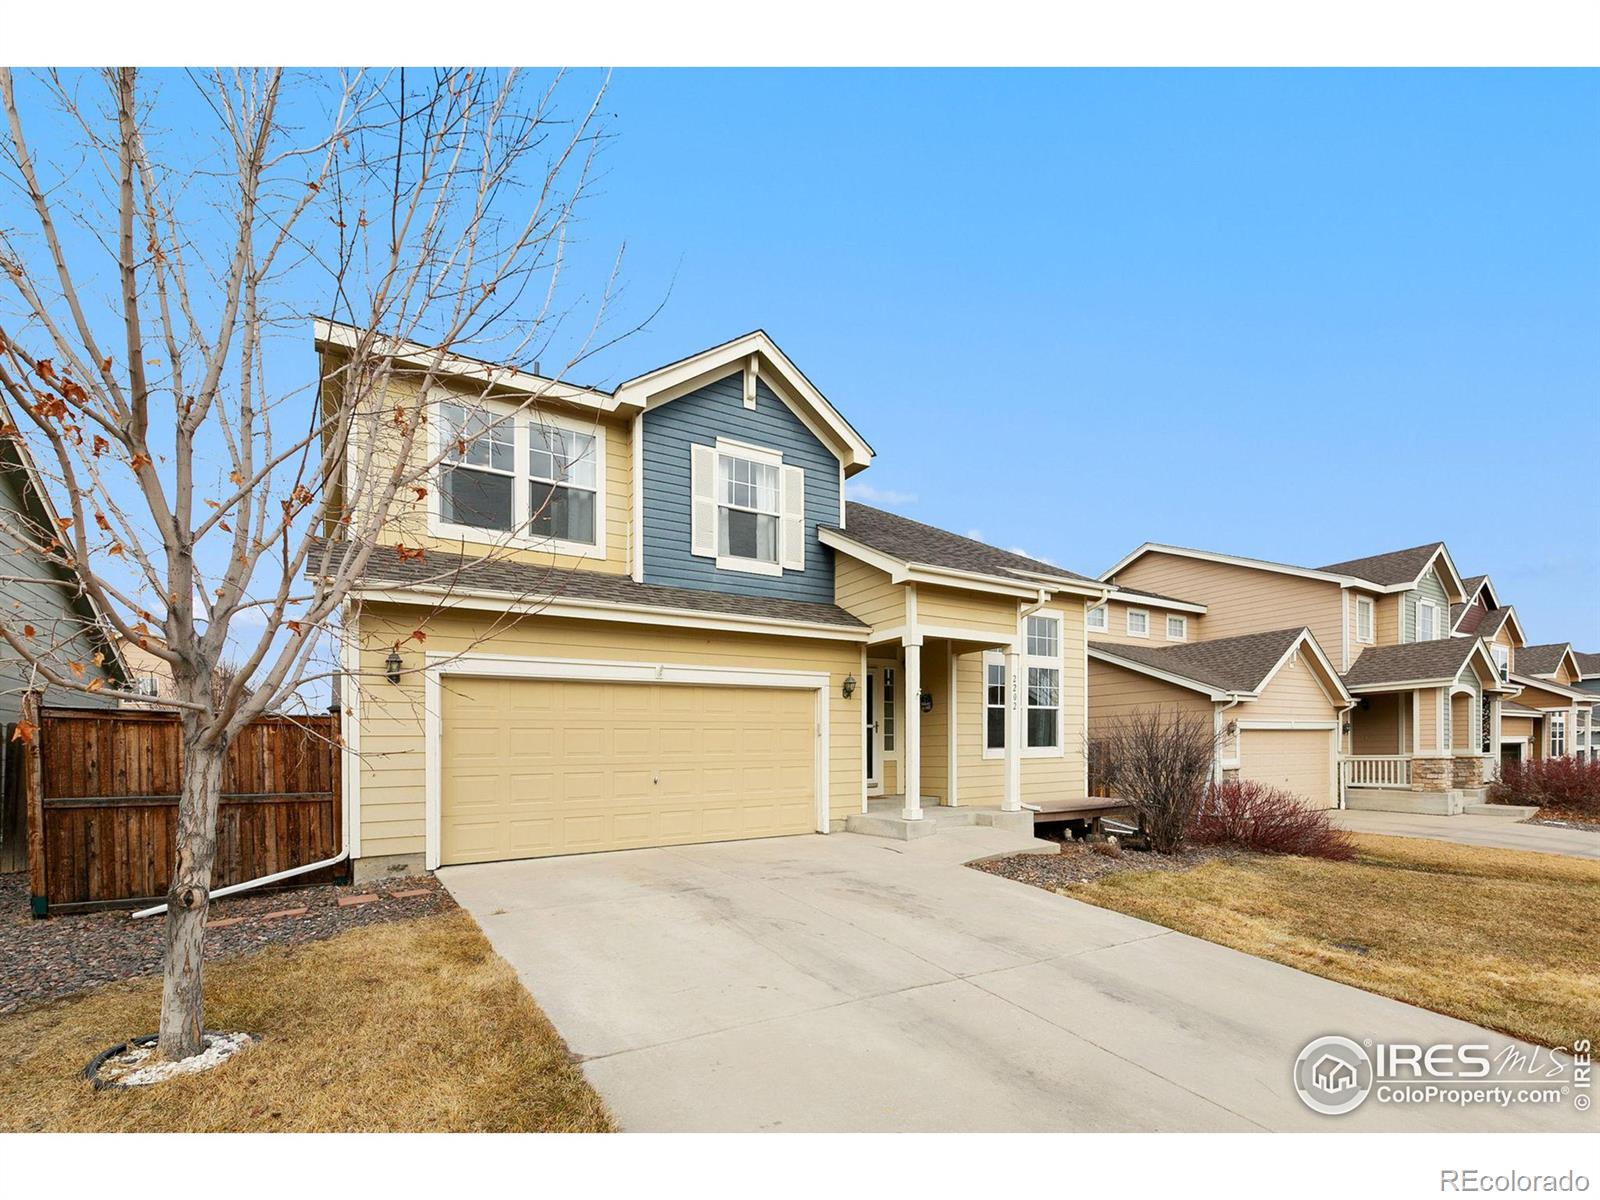 2202  Bowside Drive, fort collins MLS: 4567891002176 Beds: 4 Baths: 4 Price: $550,000